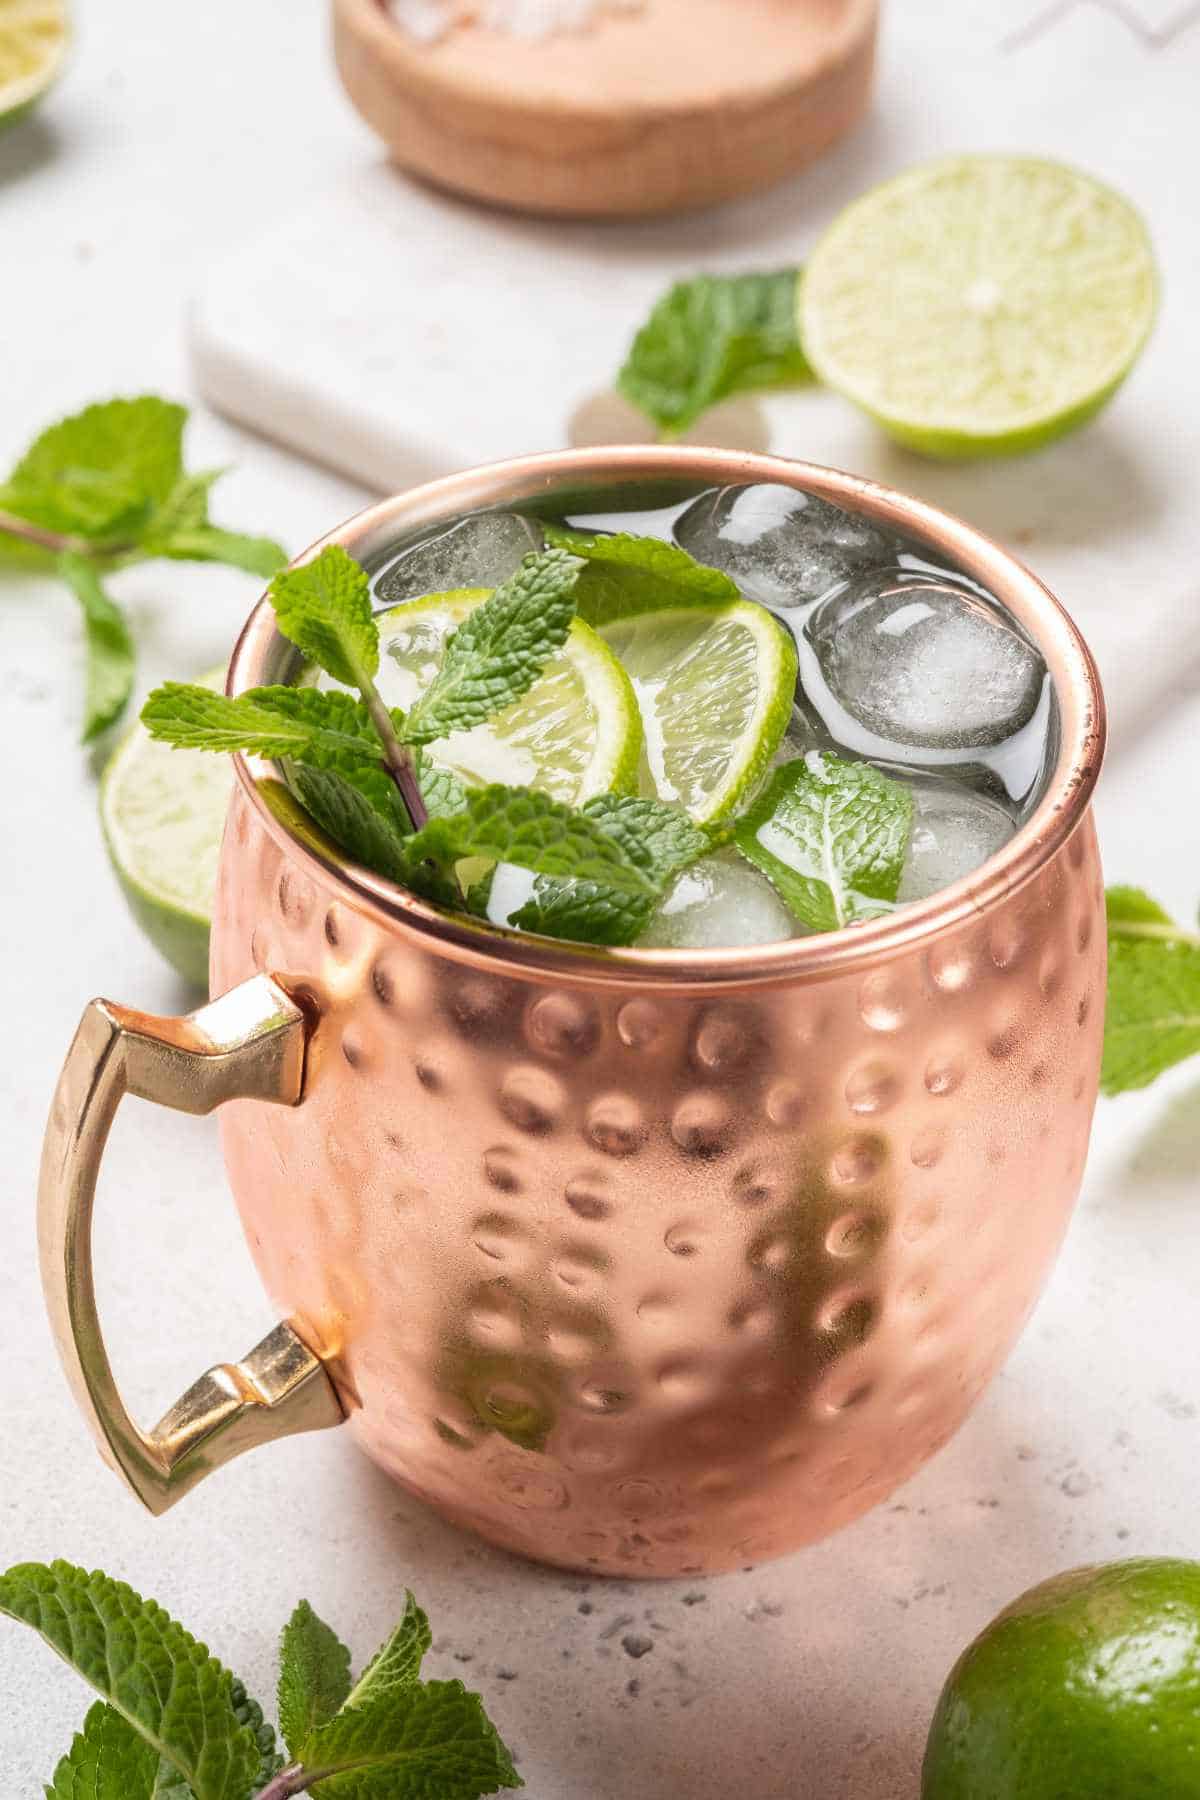 Moscow mule alcoholic cocktail in copper mug with lime, mint and cucumber.